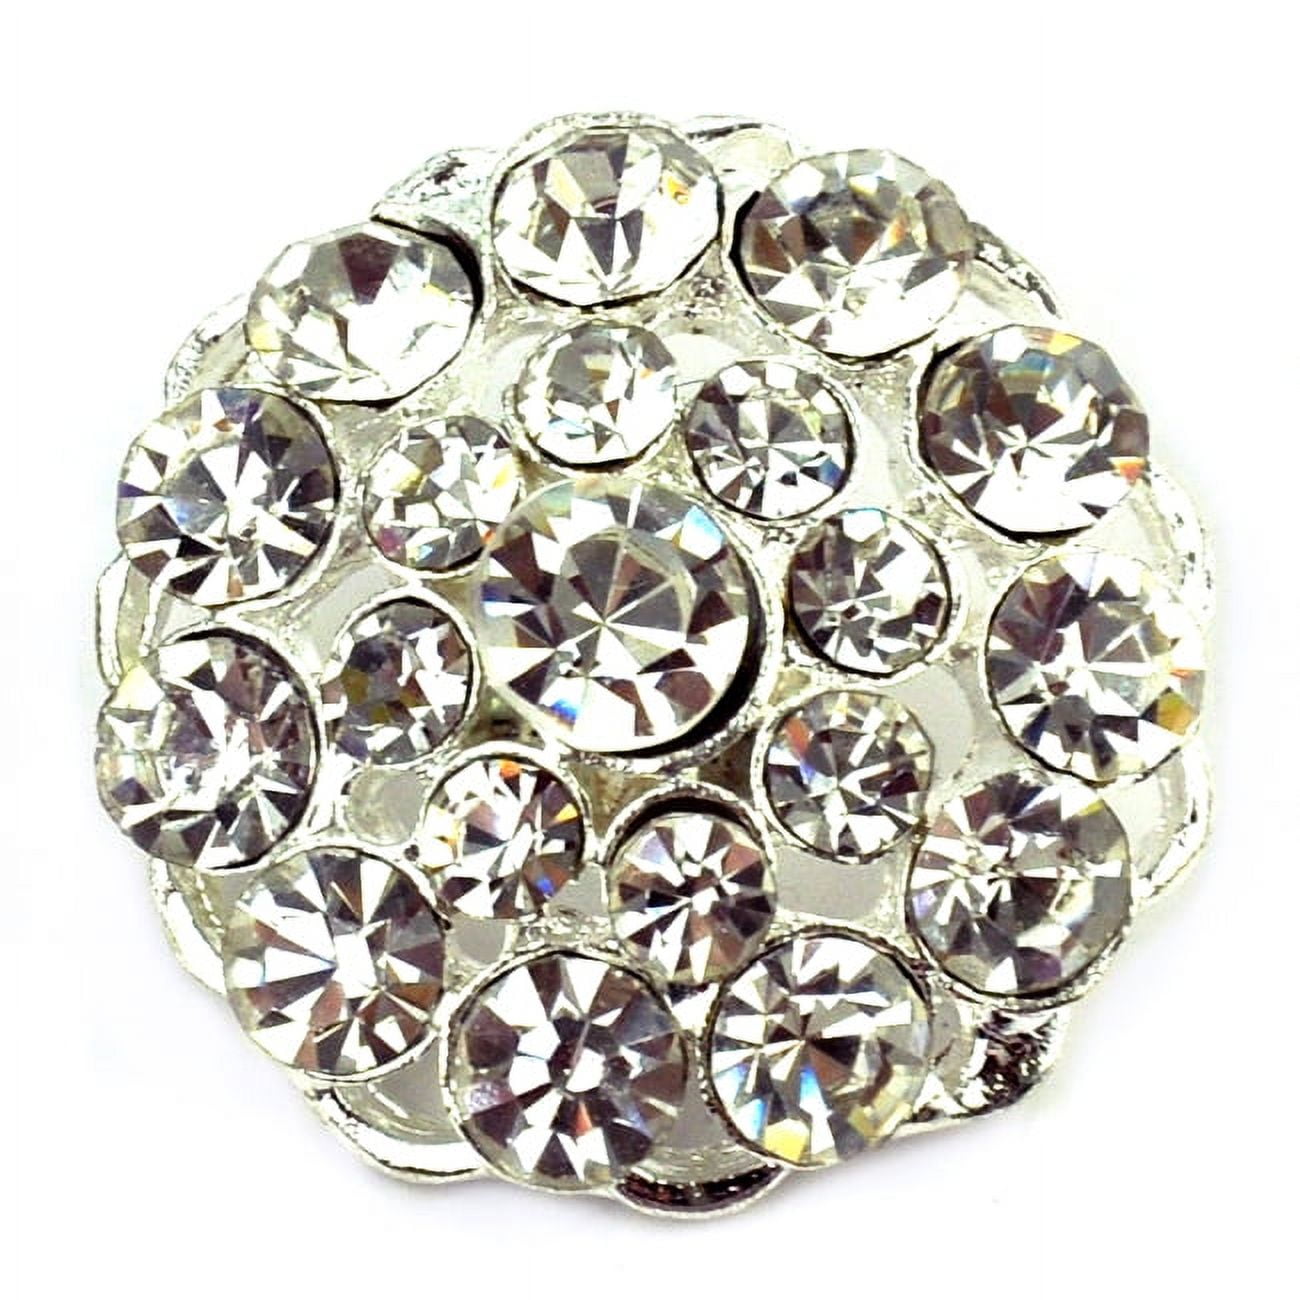 10 Round Silver rhinestone Buttons, 0.7 Round Gems Glass Buttons, Jewel  Buttons, DIY